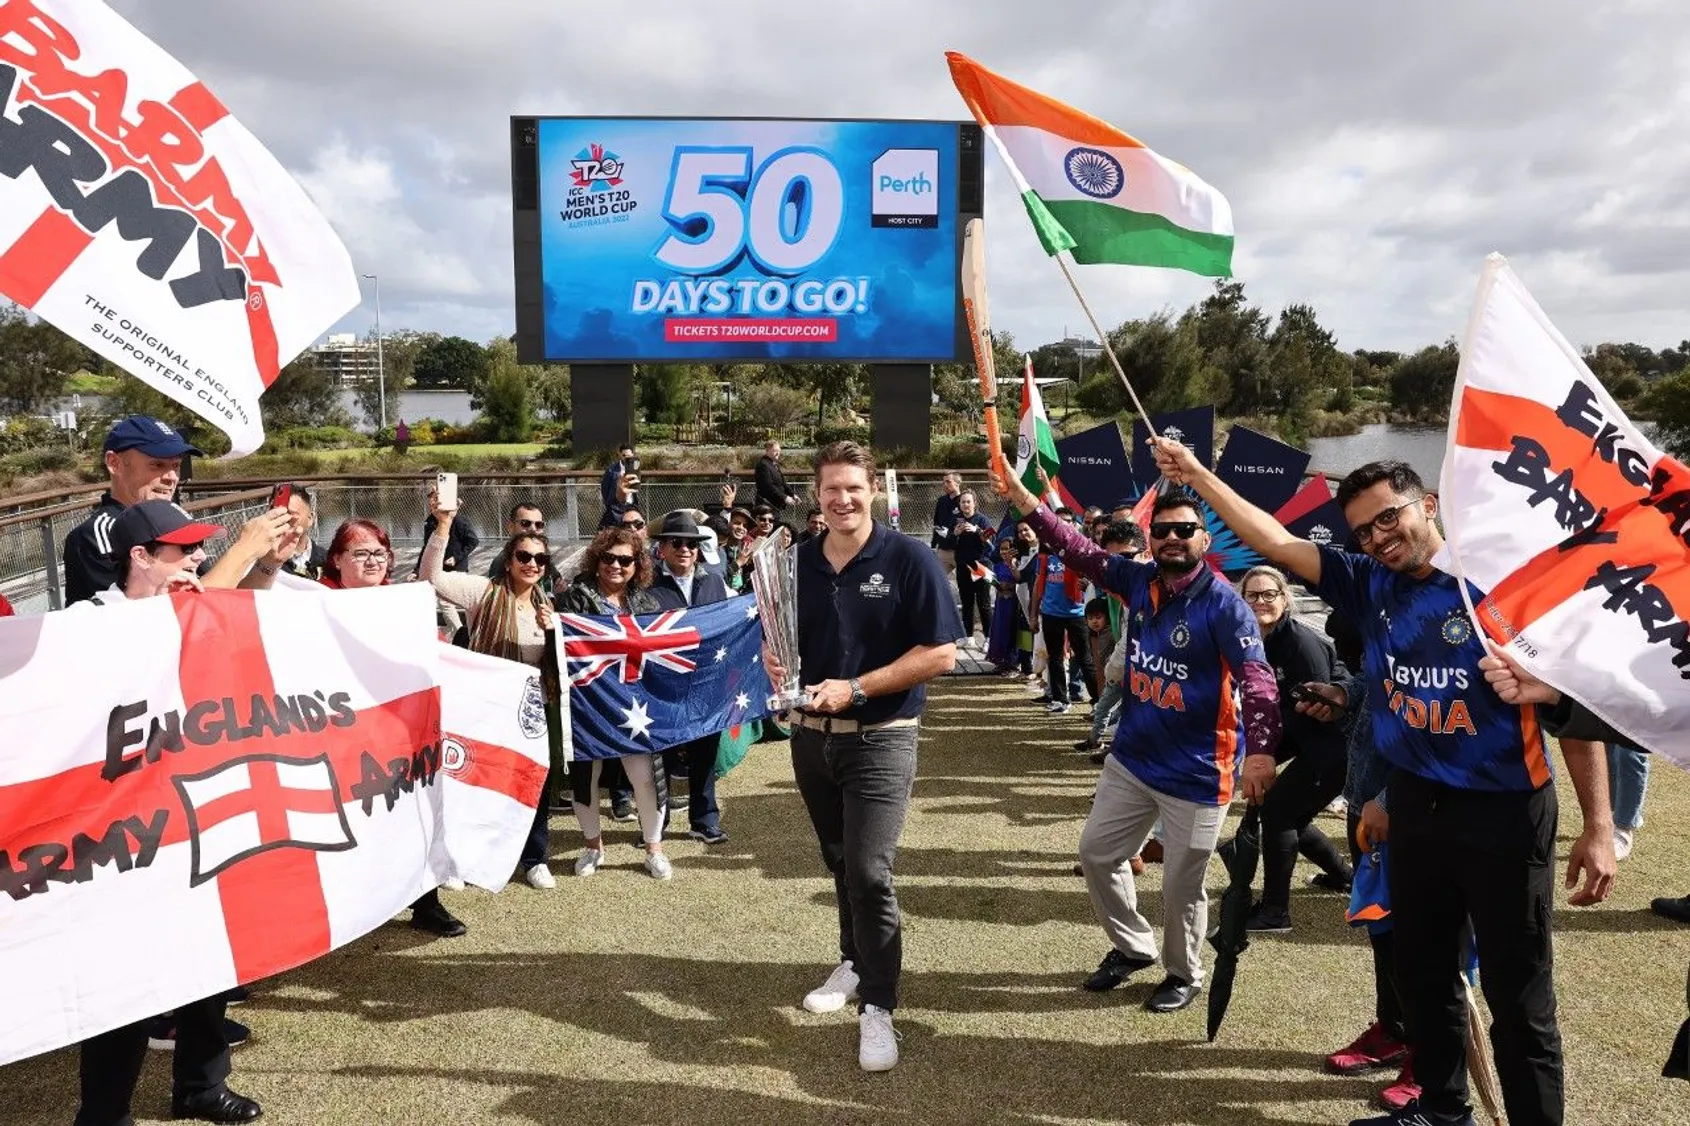 ICC Men's T20 World Cup takes to the skies across Australia for 50 days-to-go celebrations